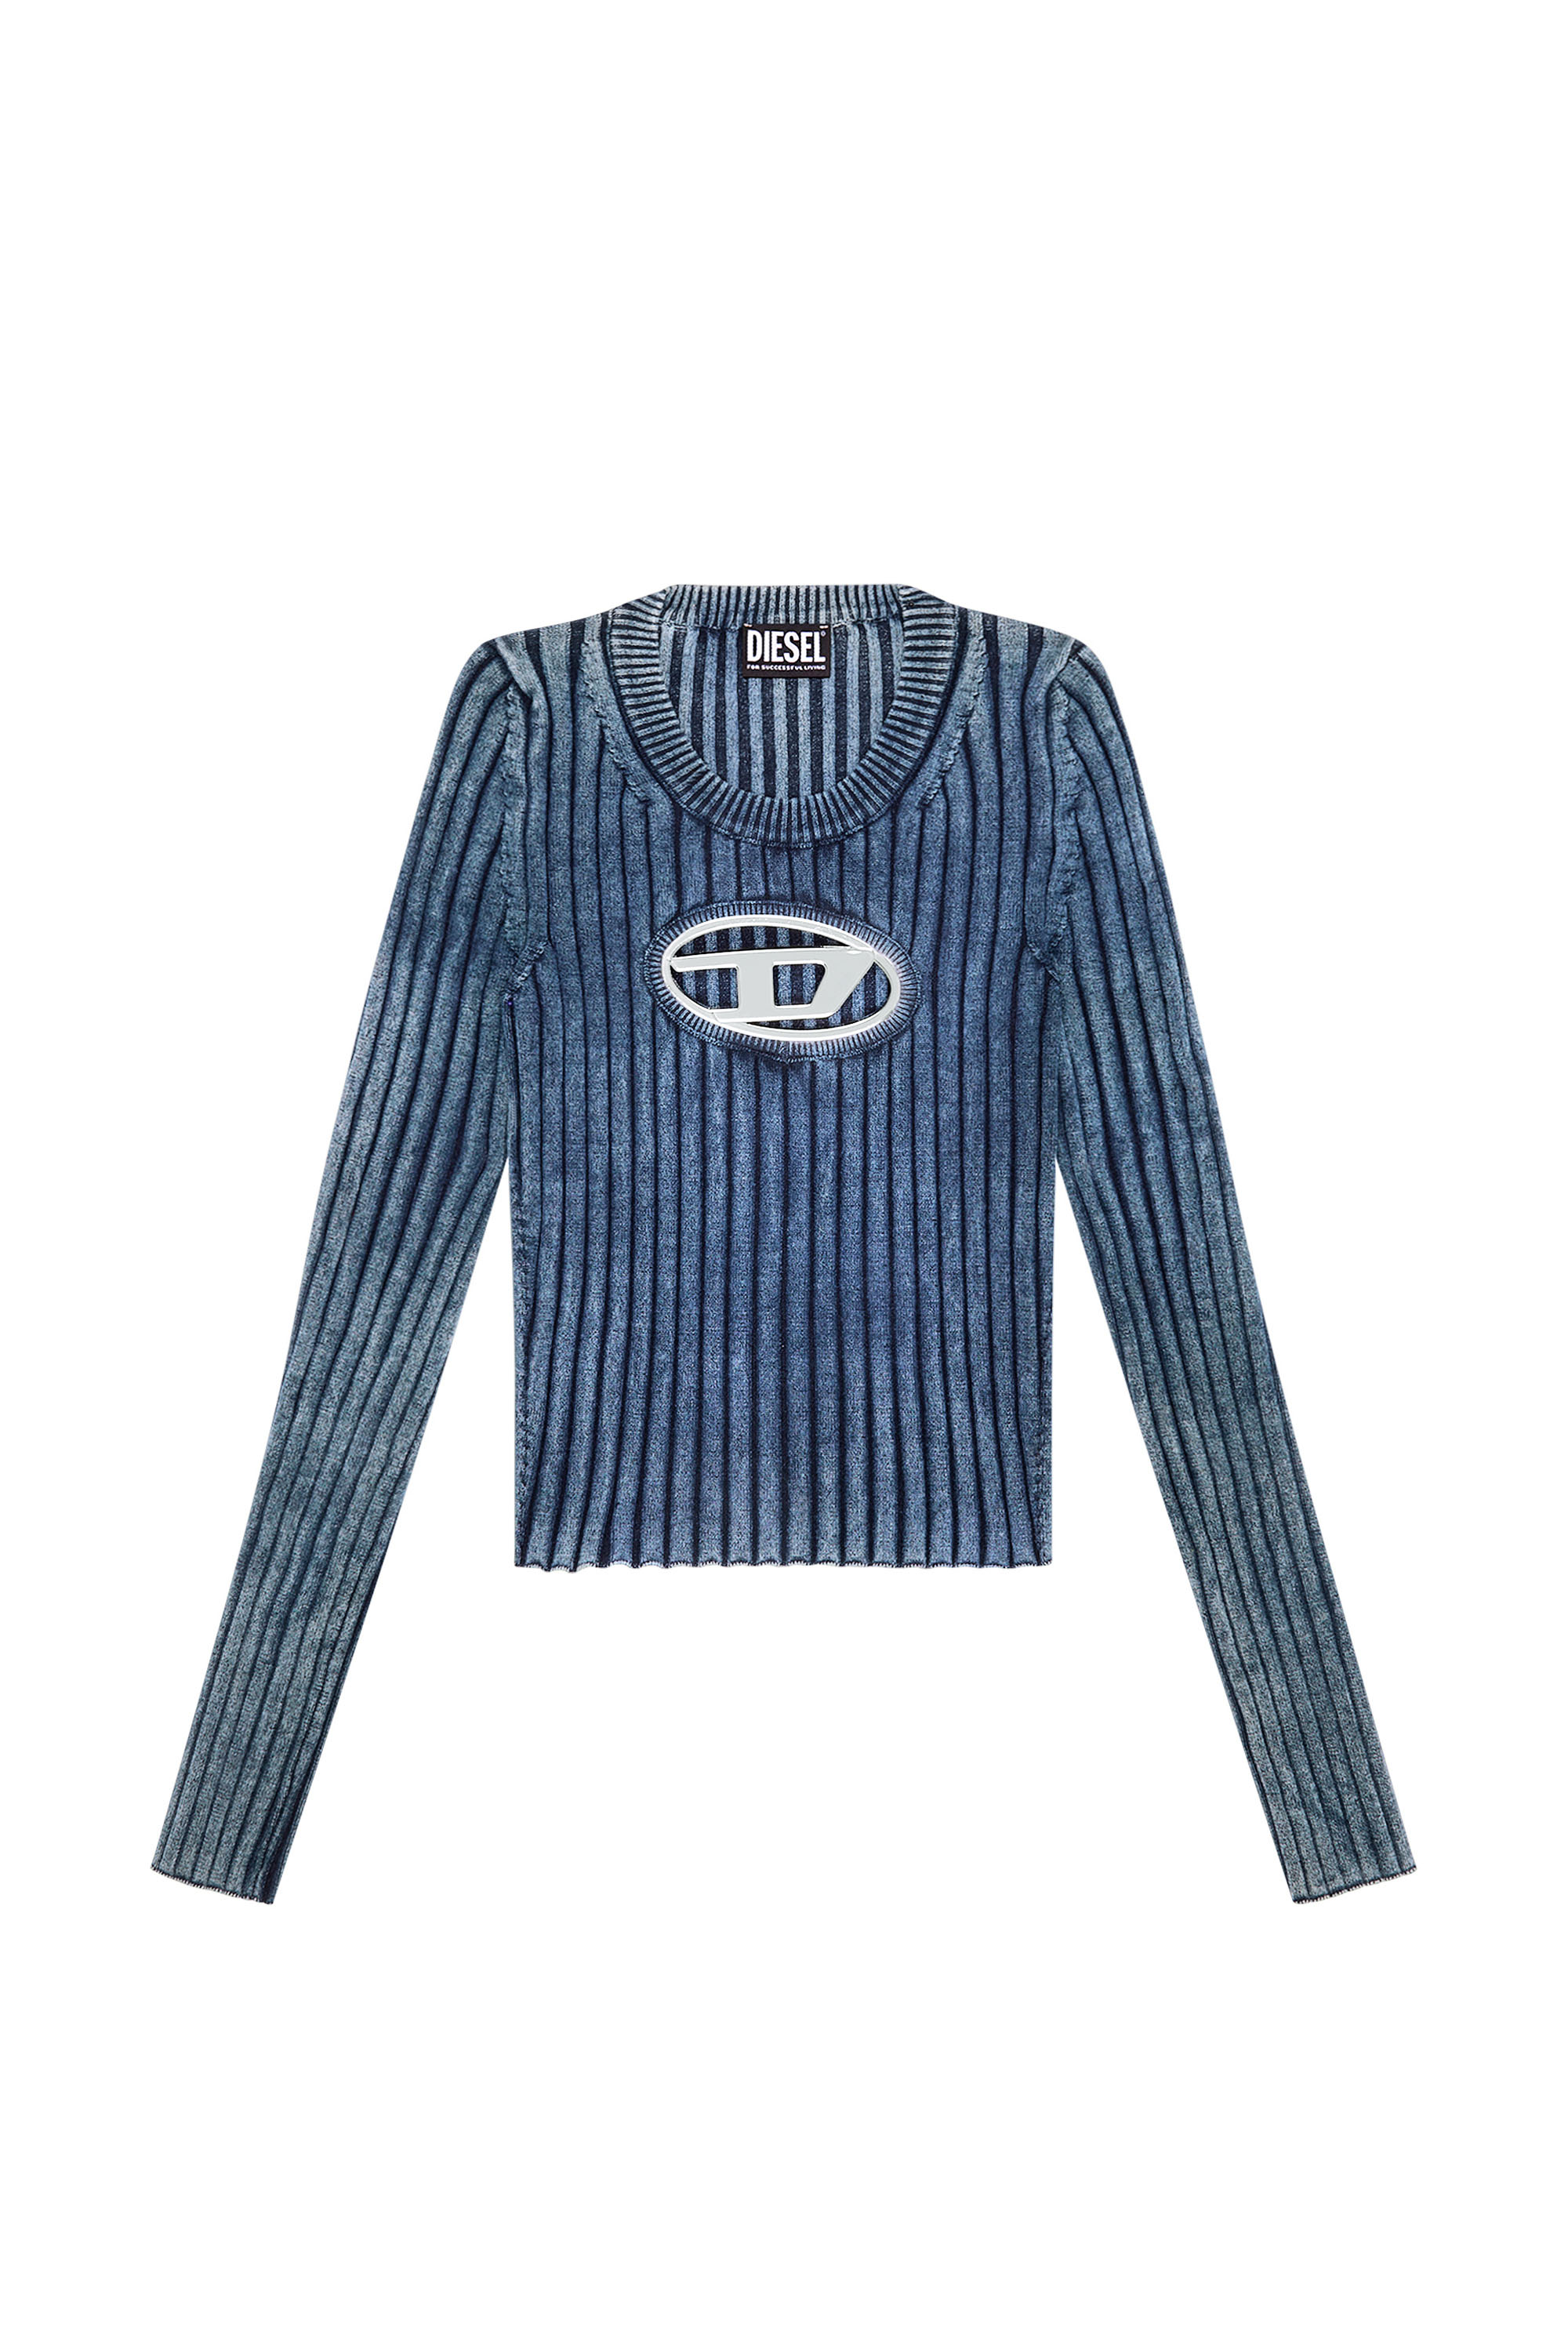 Diesel - M-ANCHOR, Woman Bouclé pullover in Blue - Image 4